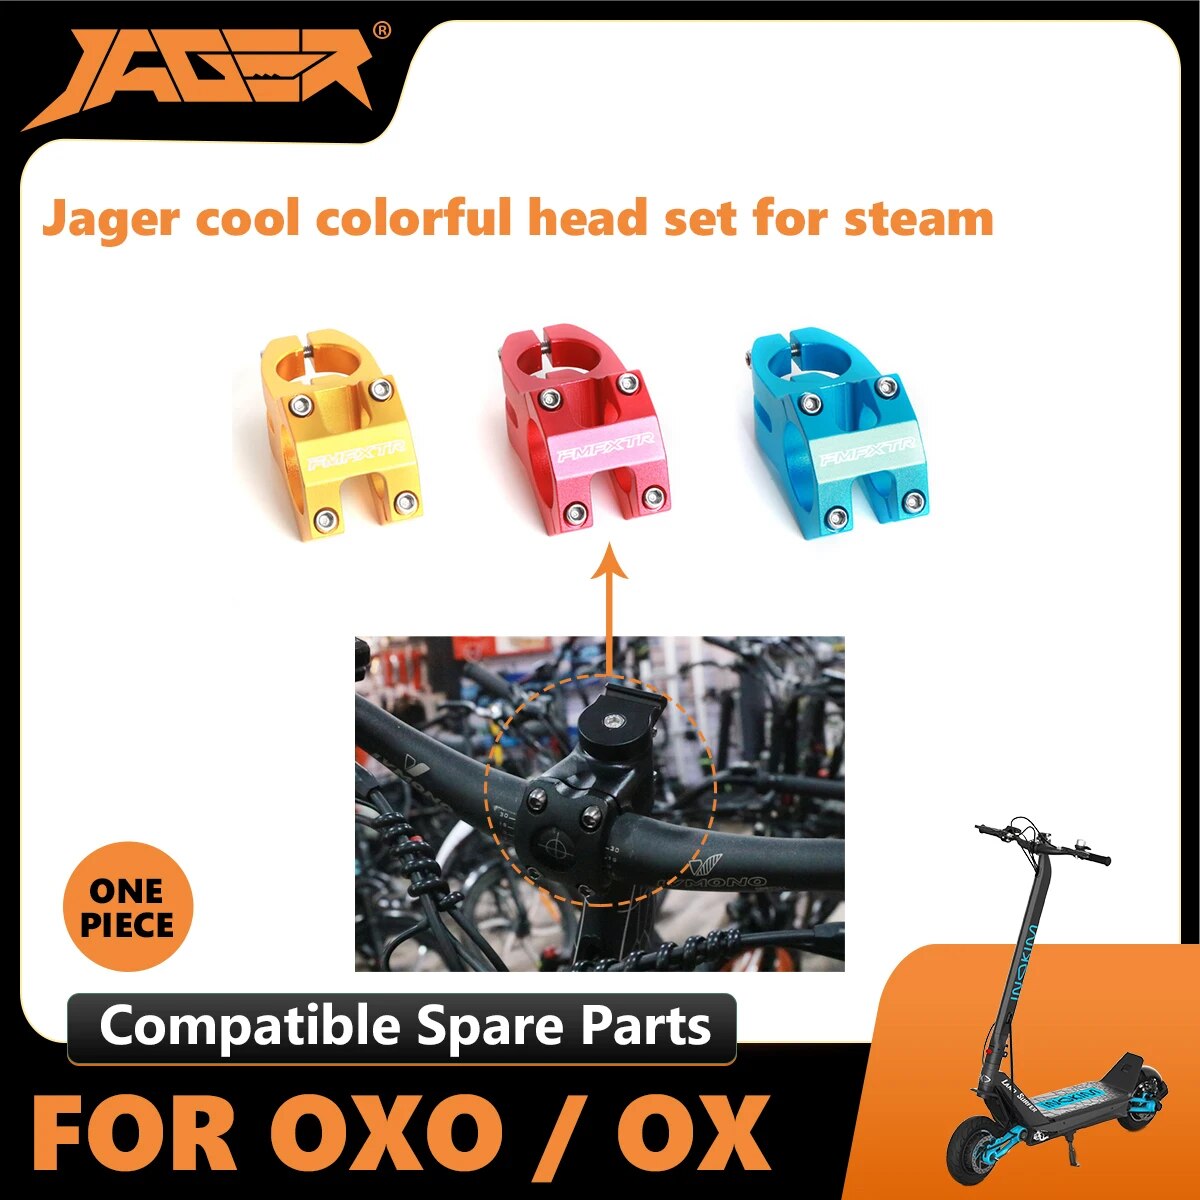 Jager head set for steam compatible Inokim parts